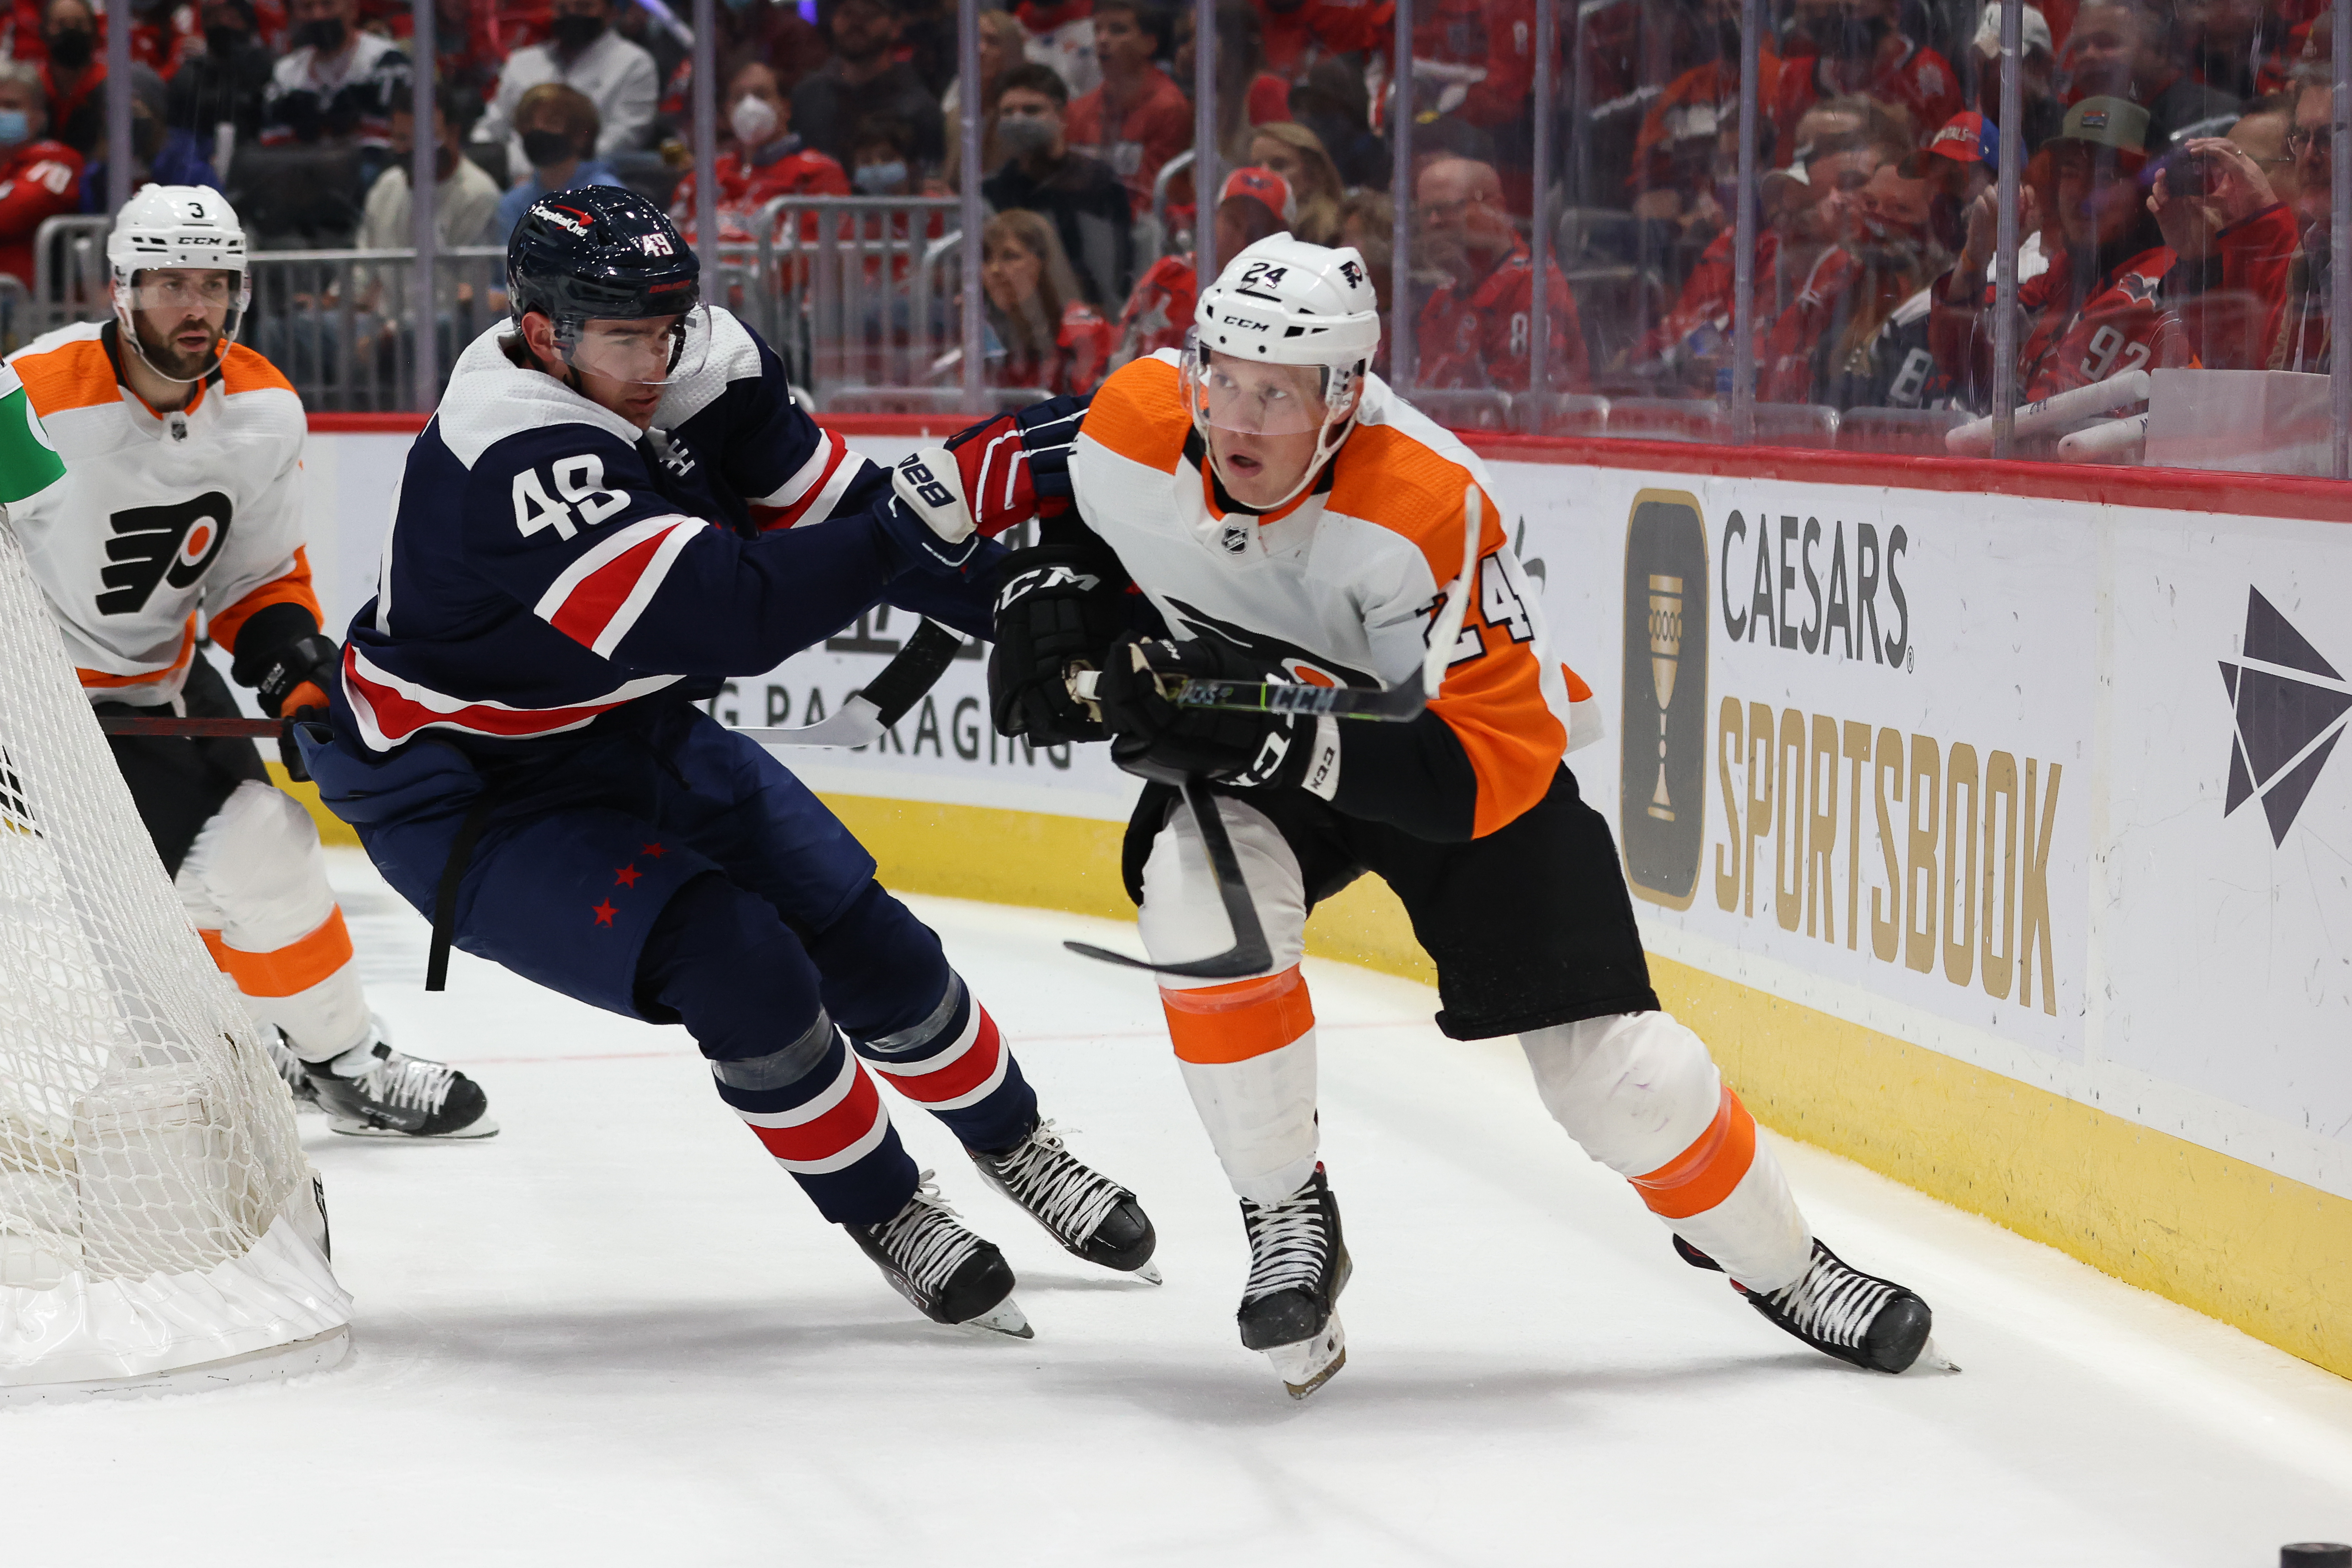 Brassard, Couturier Score To Lead Flyers Past Capitals 2-1